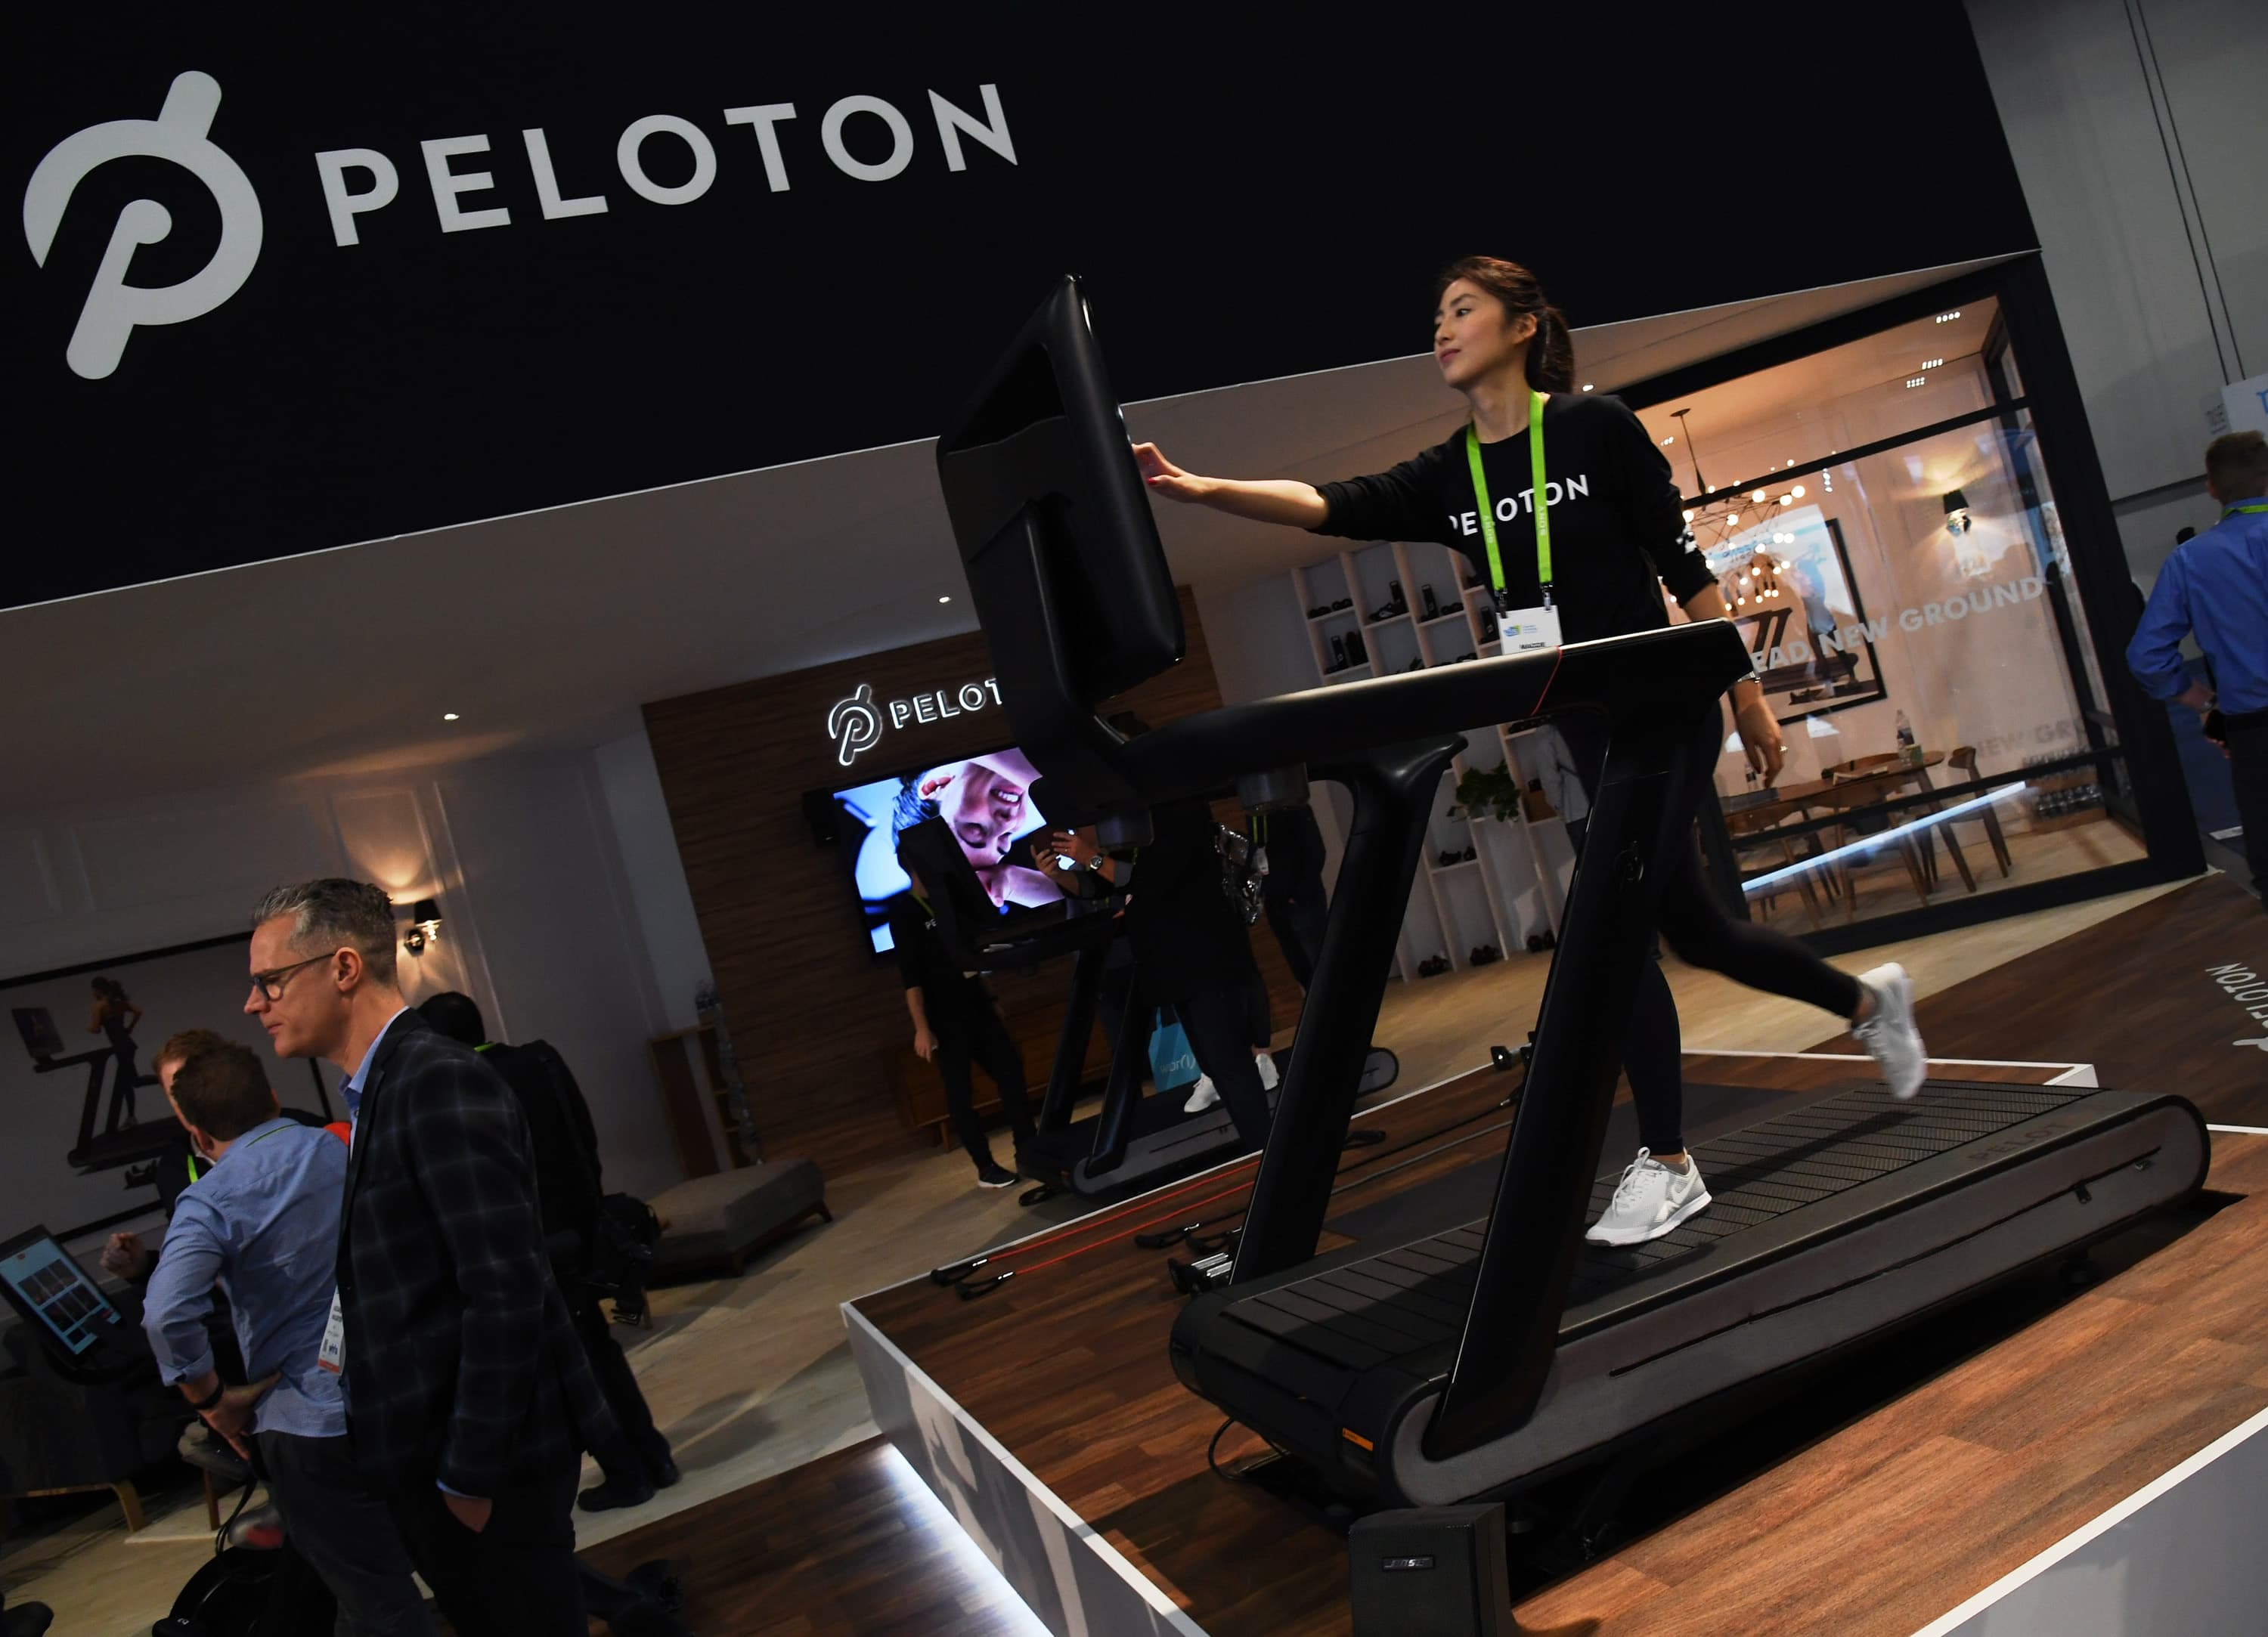 Peloton’s clash with agency over Tread + safety could hurt the brand